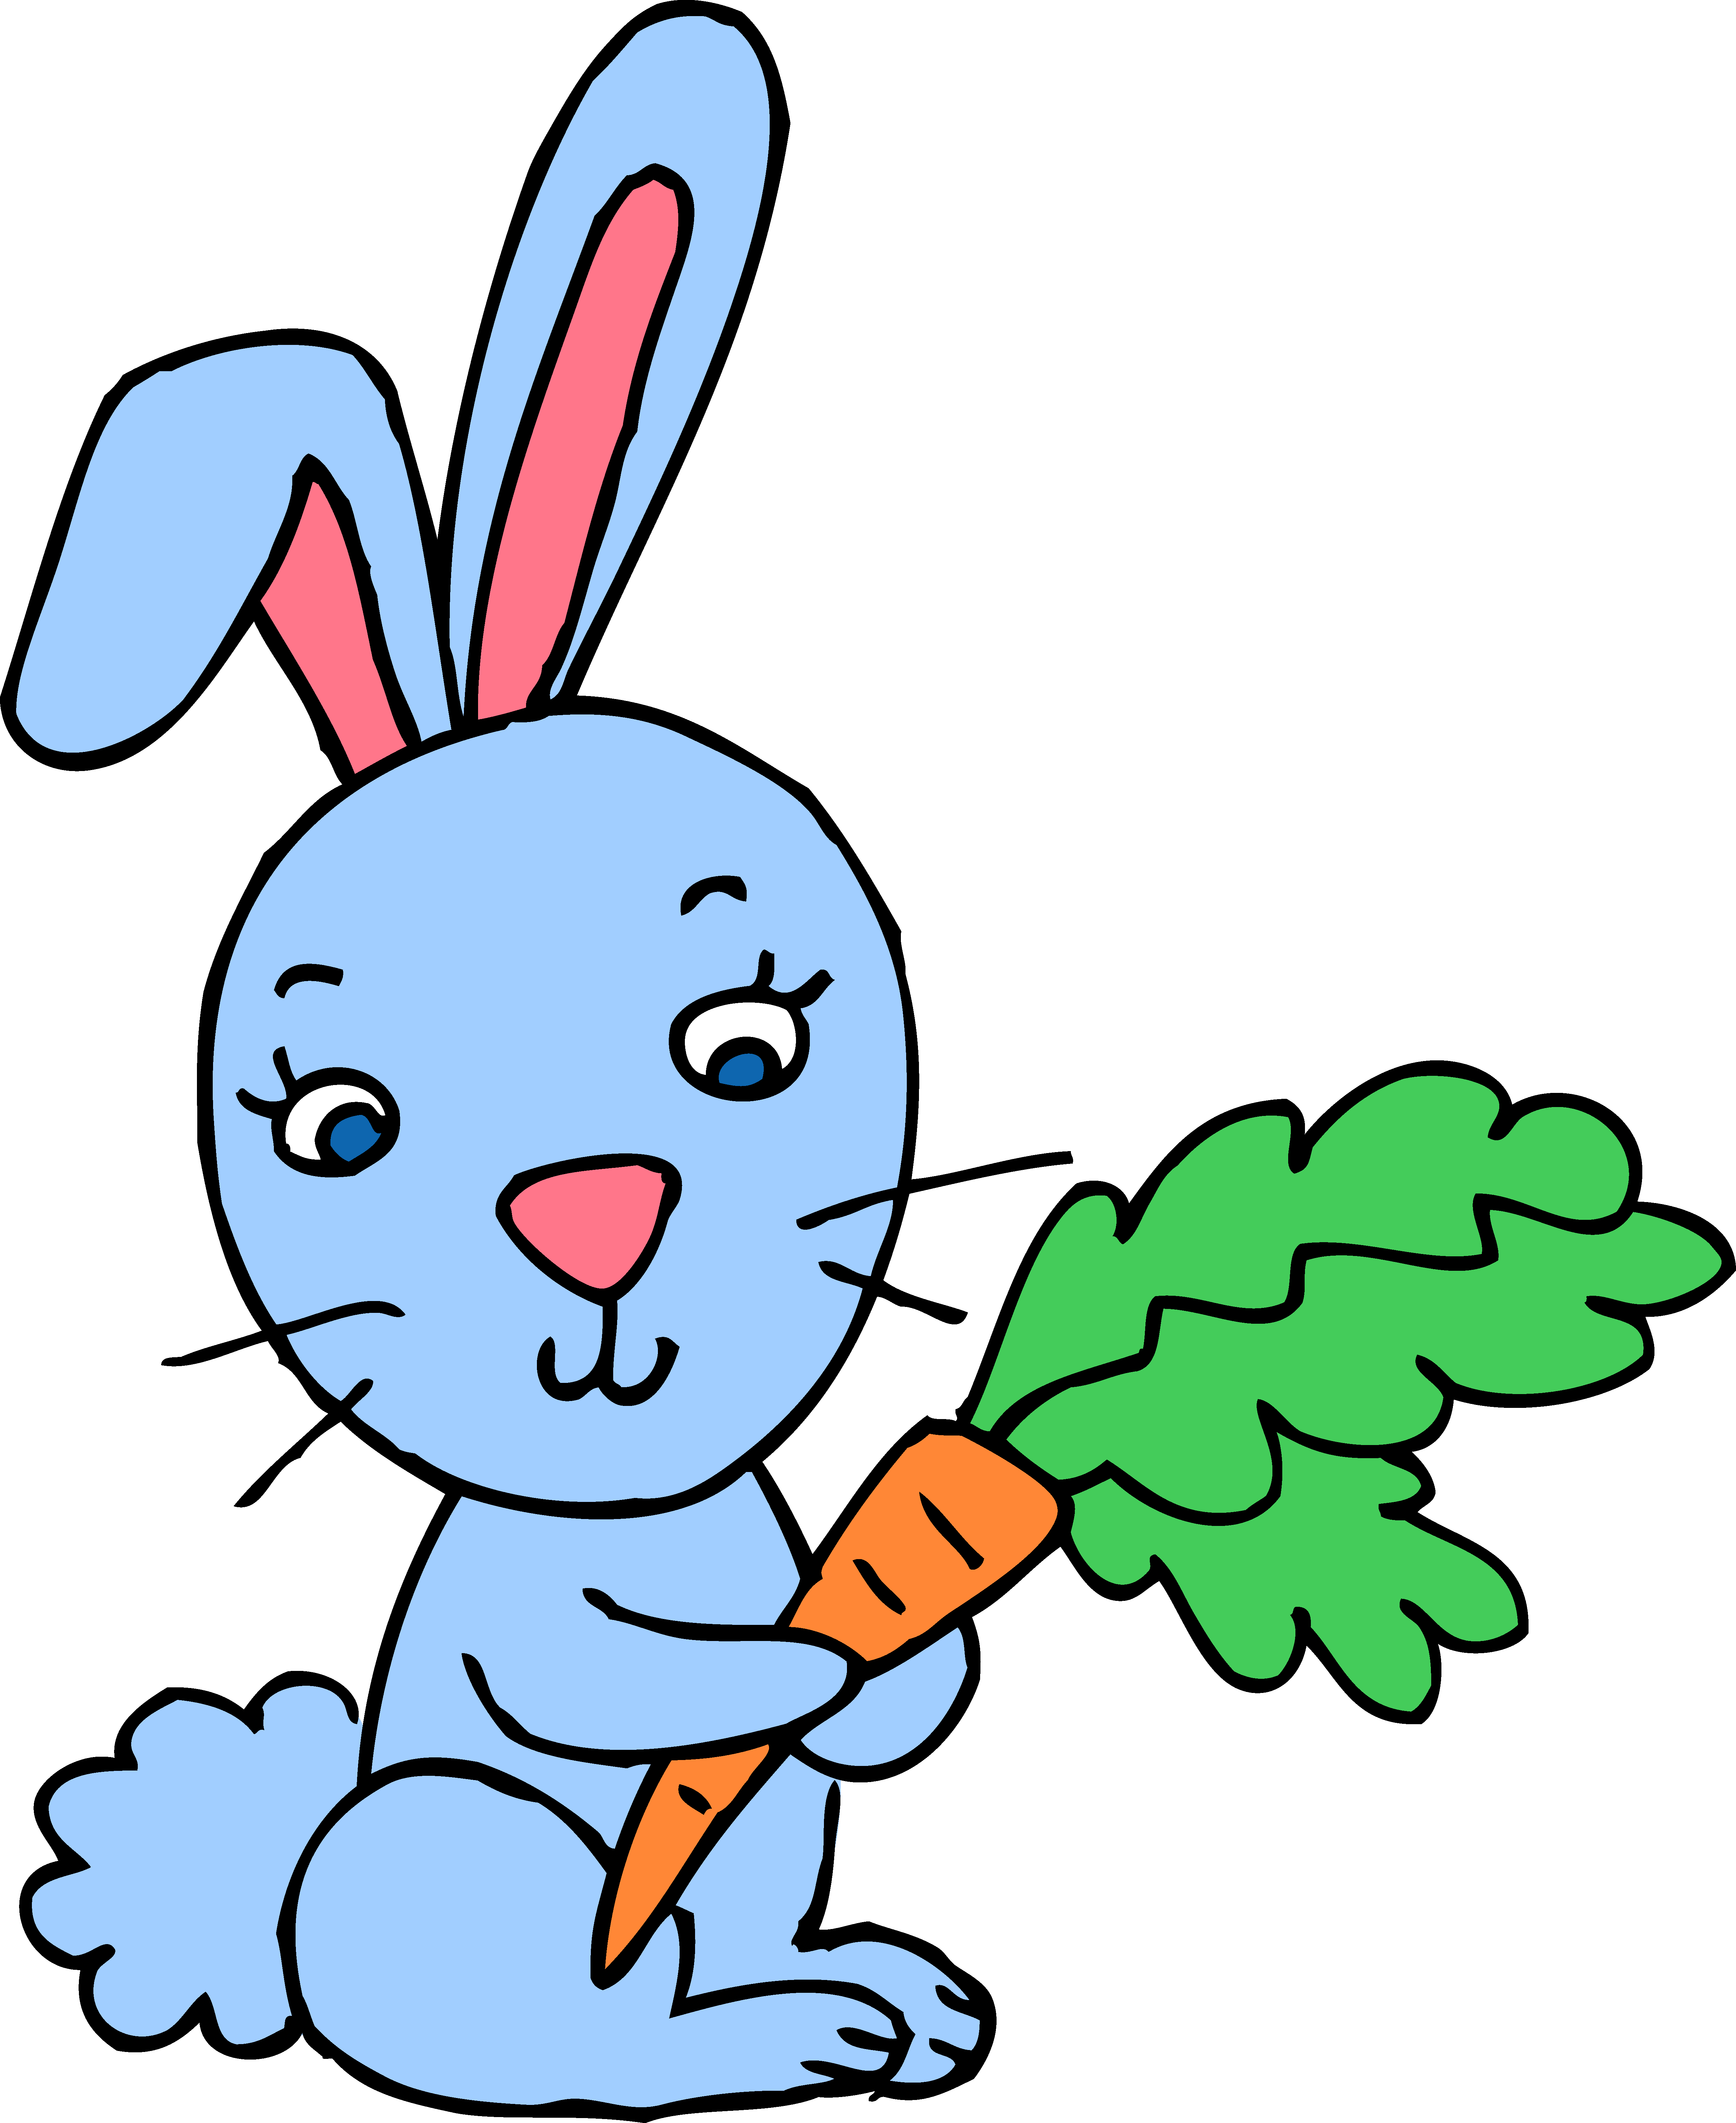 Free Bunny Clip Art Download Free Bunny Clip Art Png Images Free